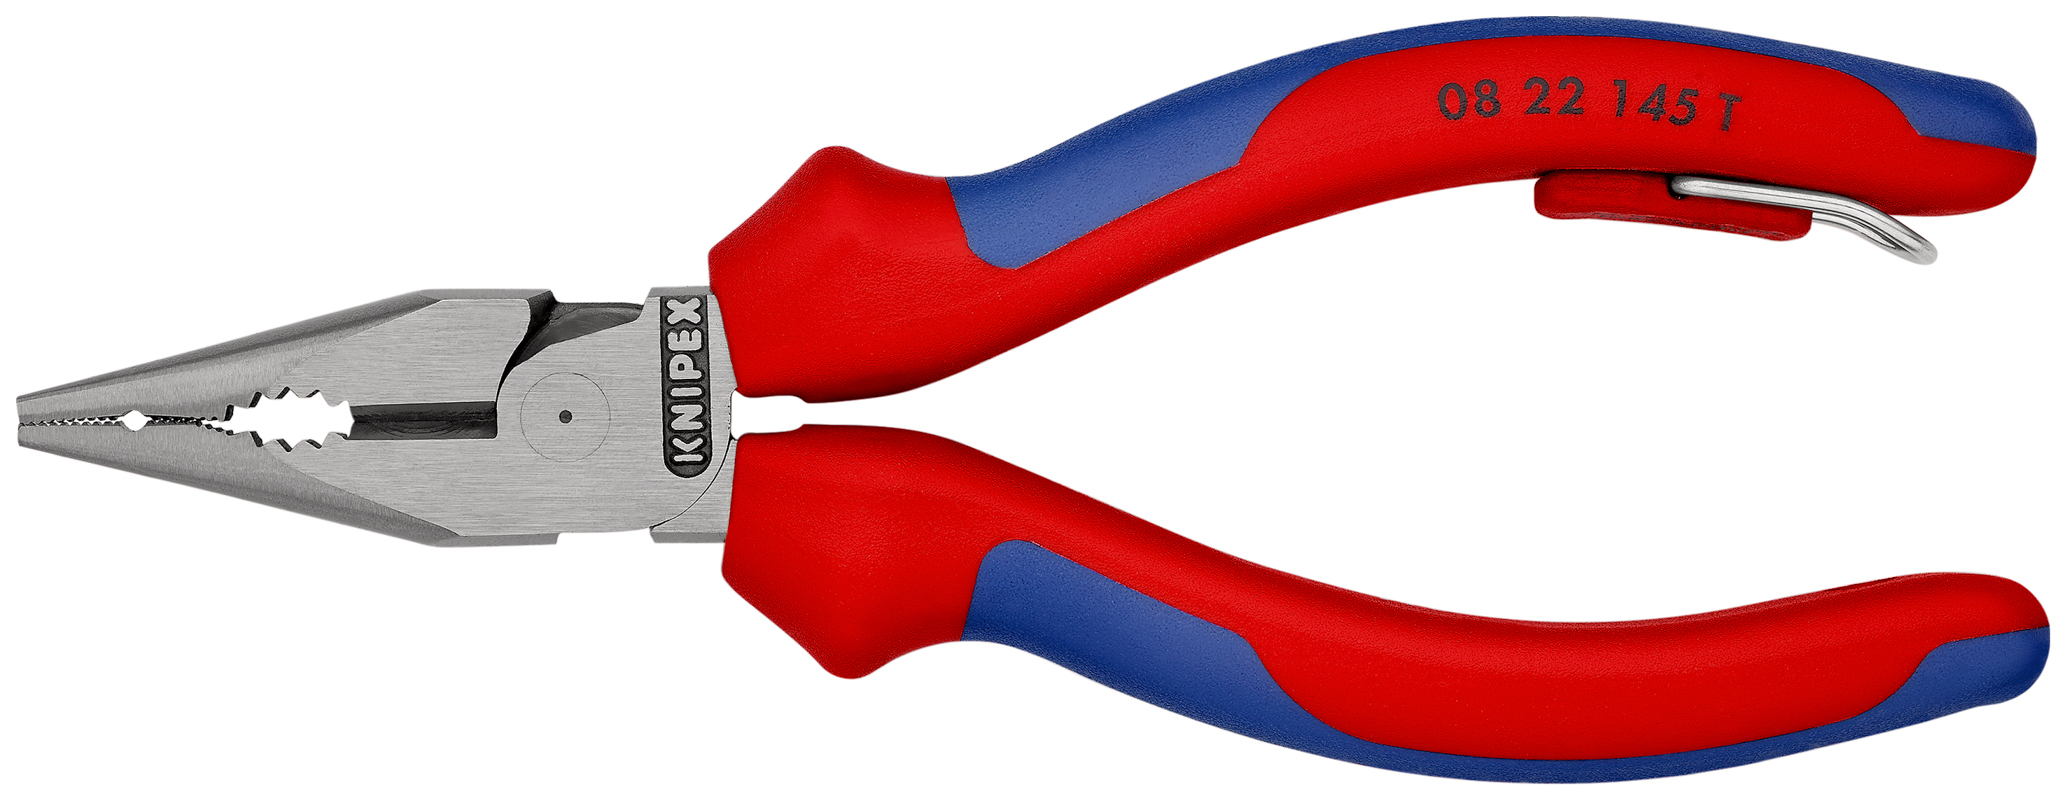 Pince univers. 1/2 ronde 145mm antichute KNIPEX - 08 22 145 T